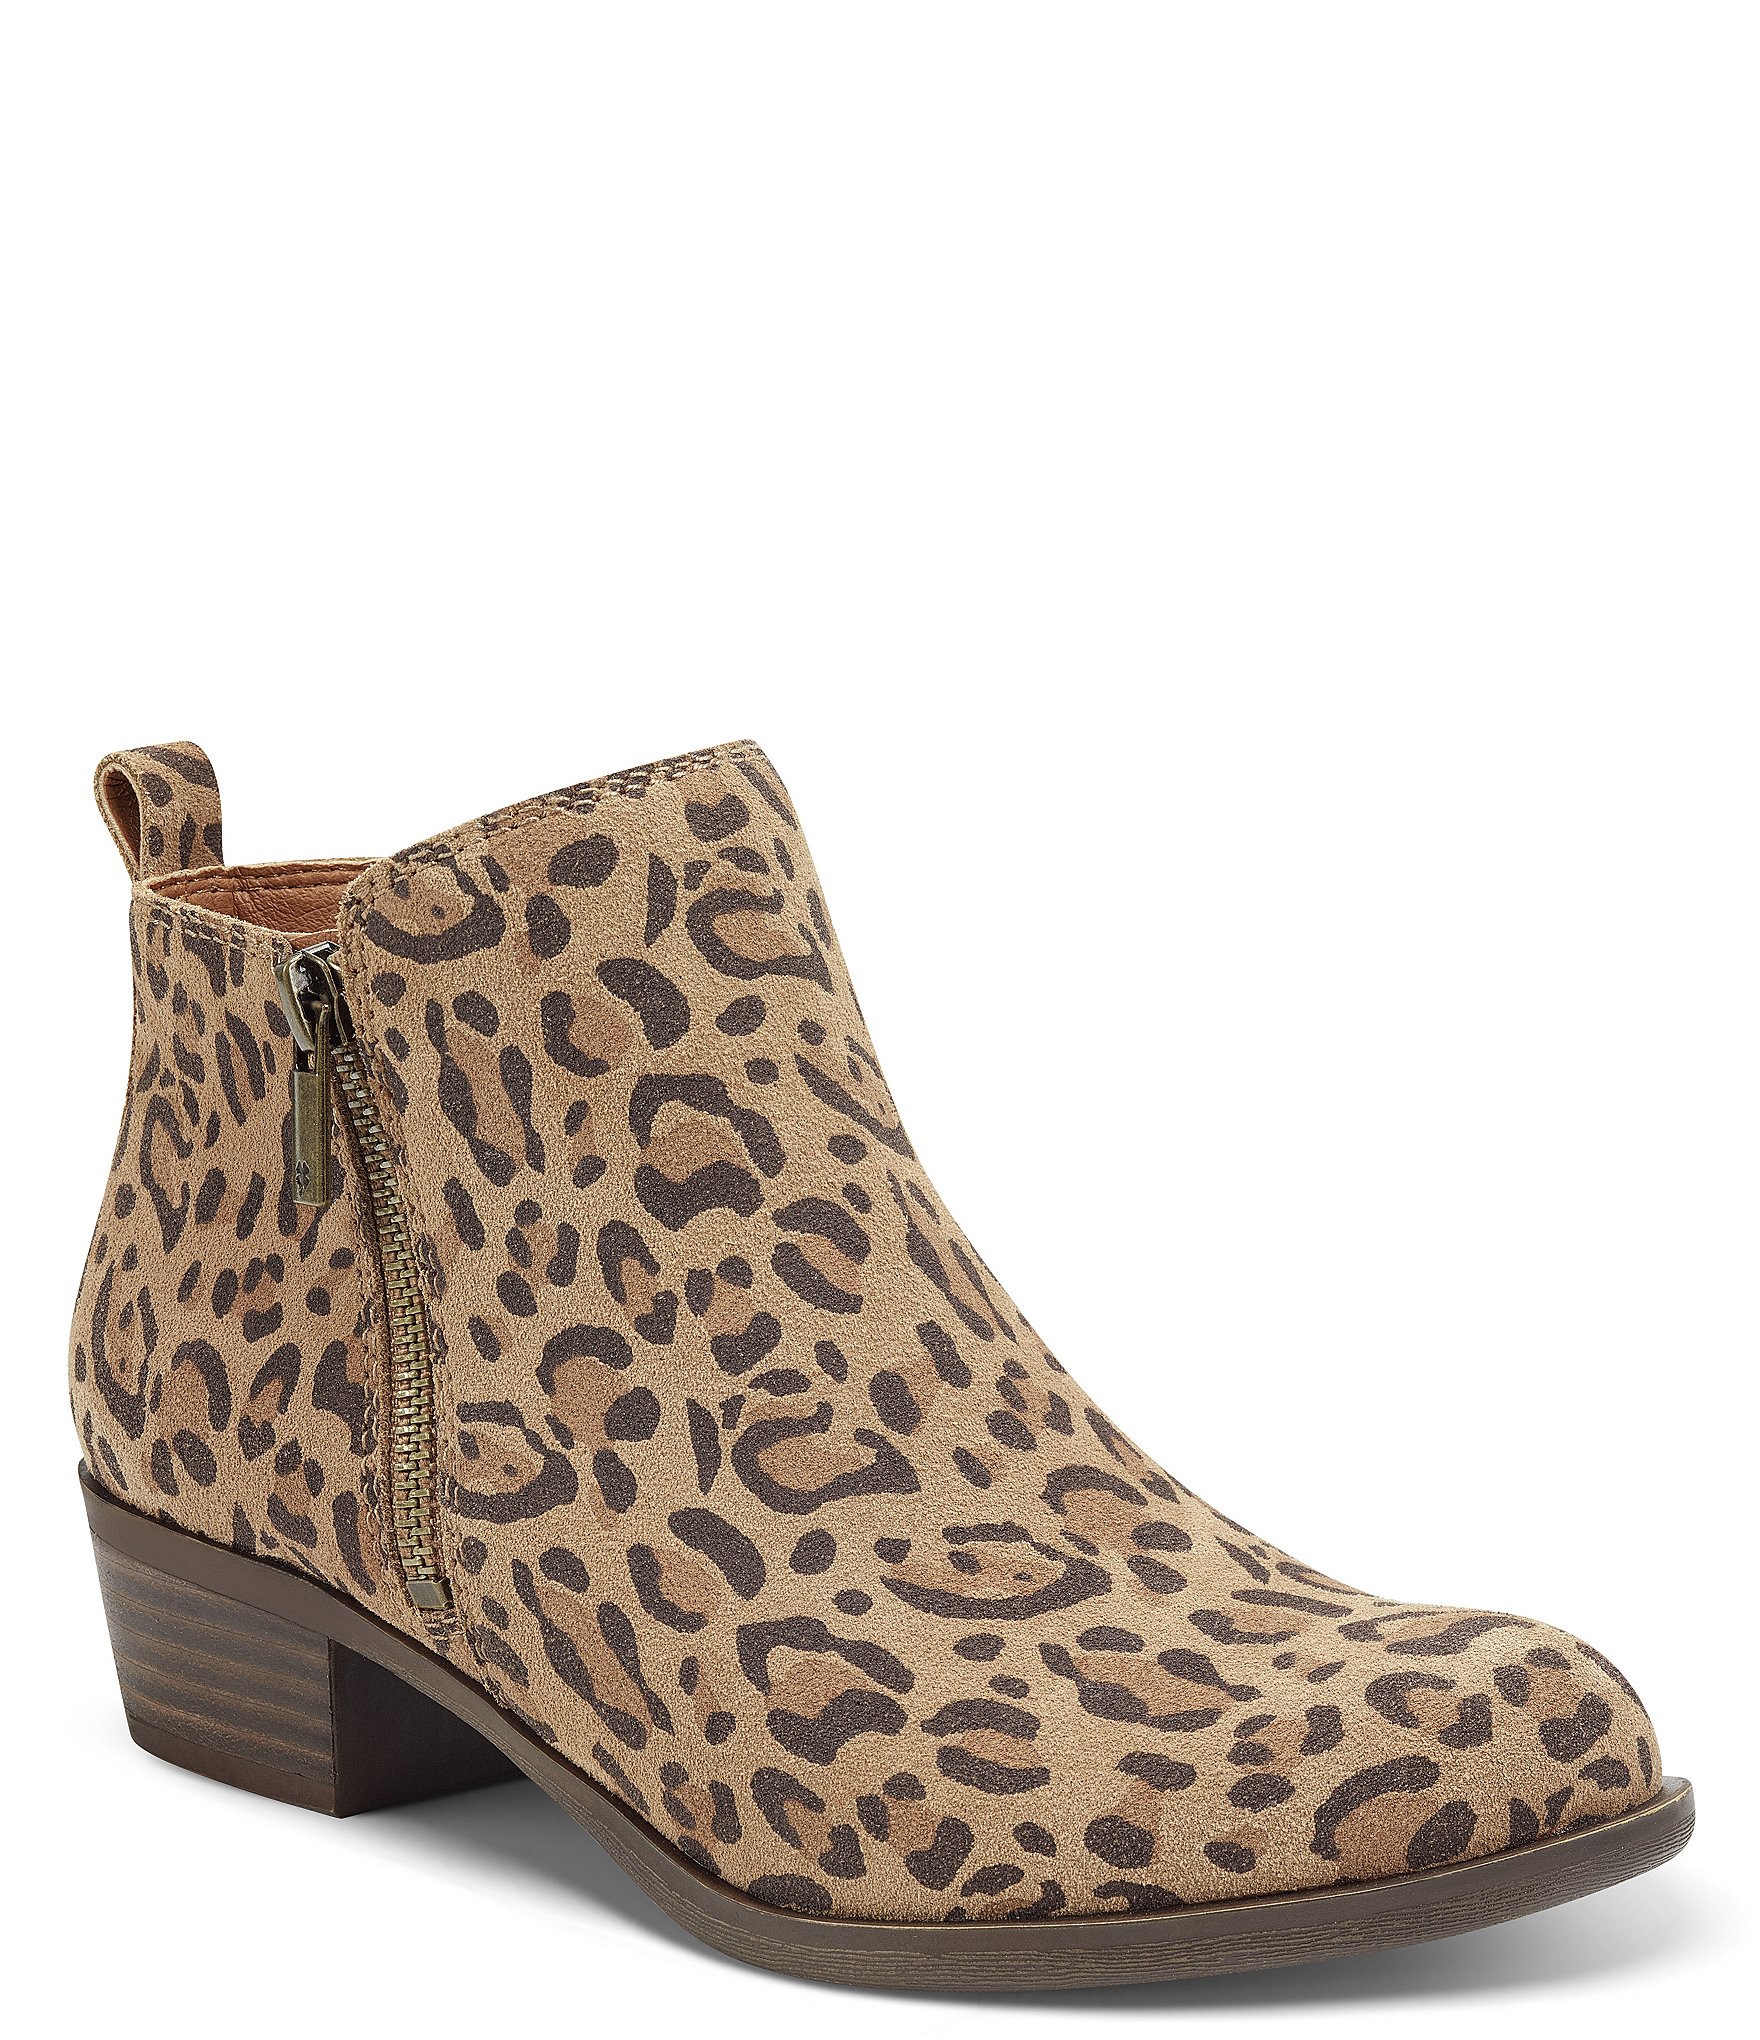 Lucky Brand Shoes, Glaina Leopard Leather Sandals